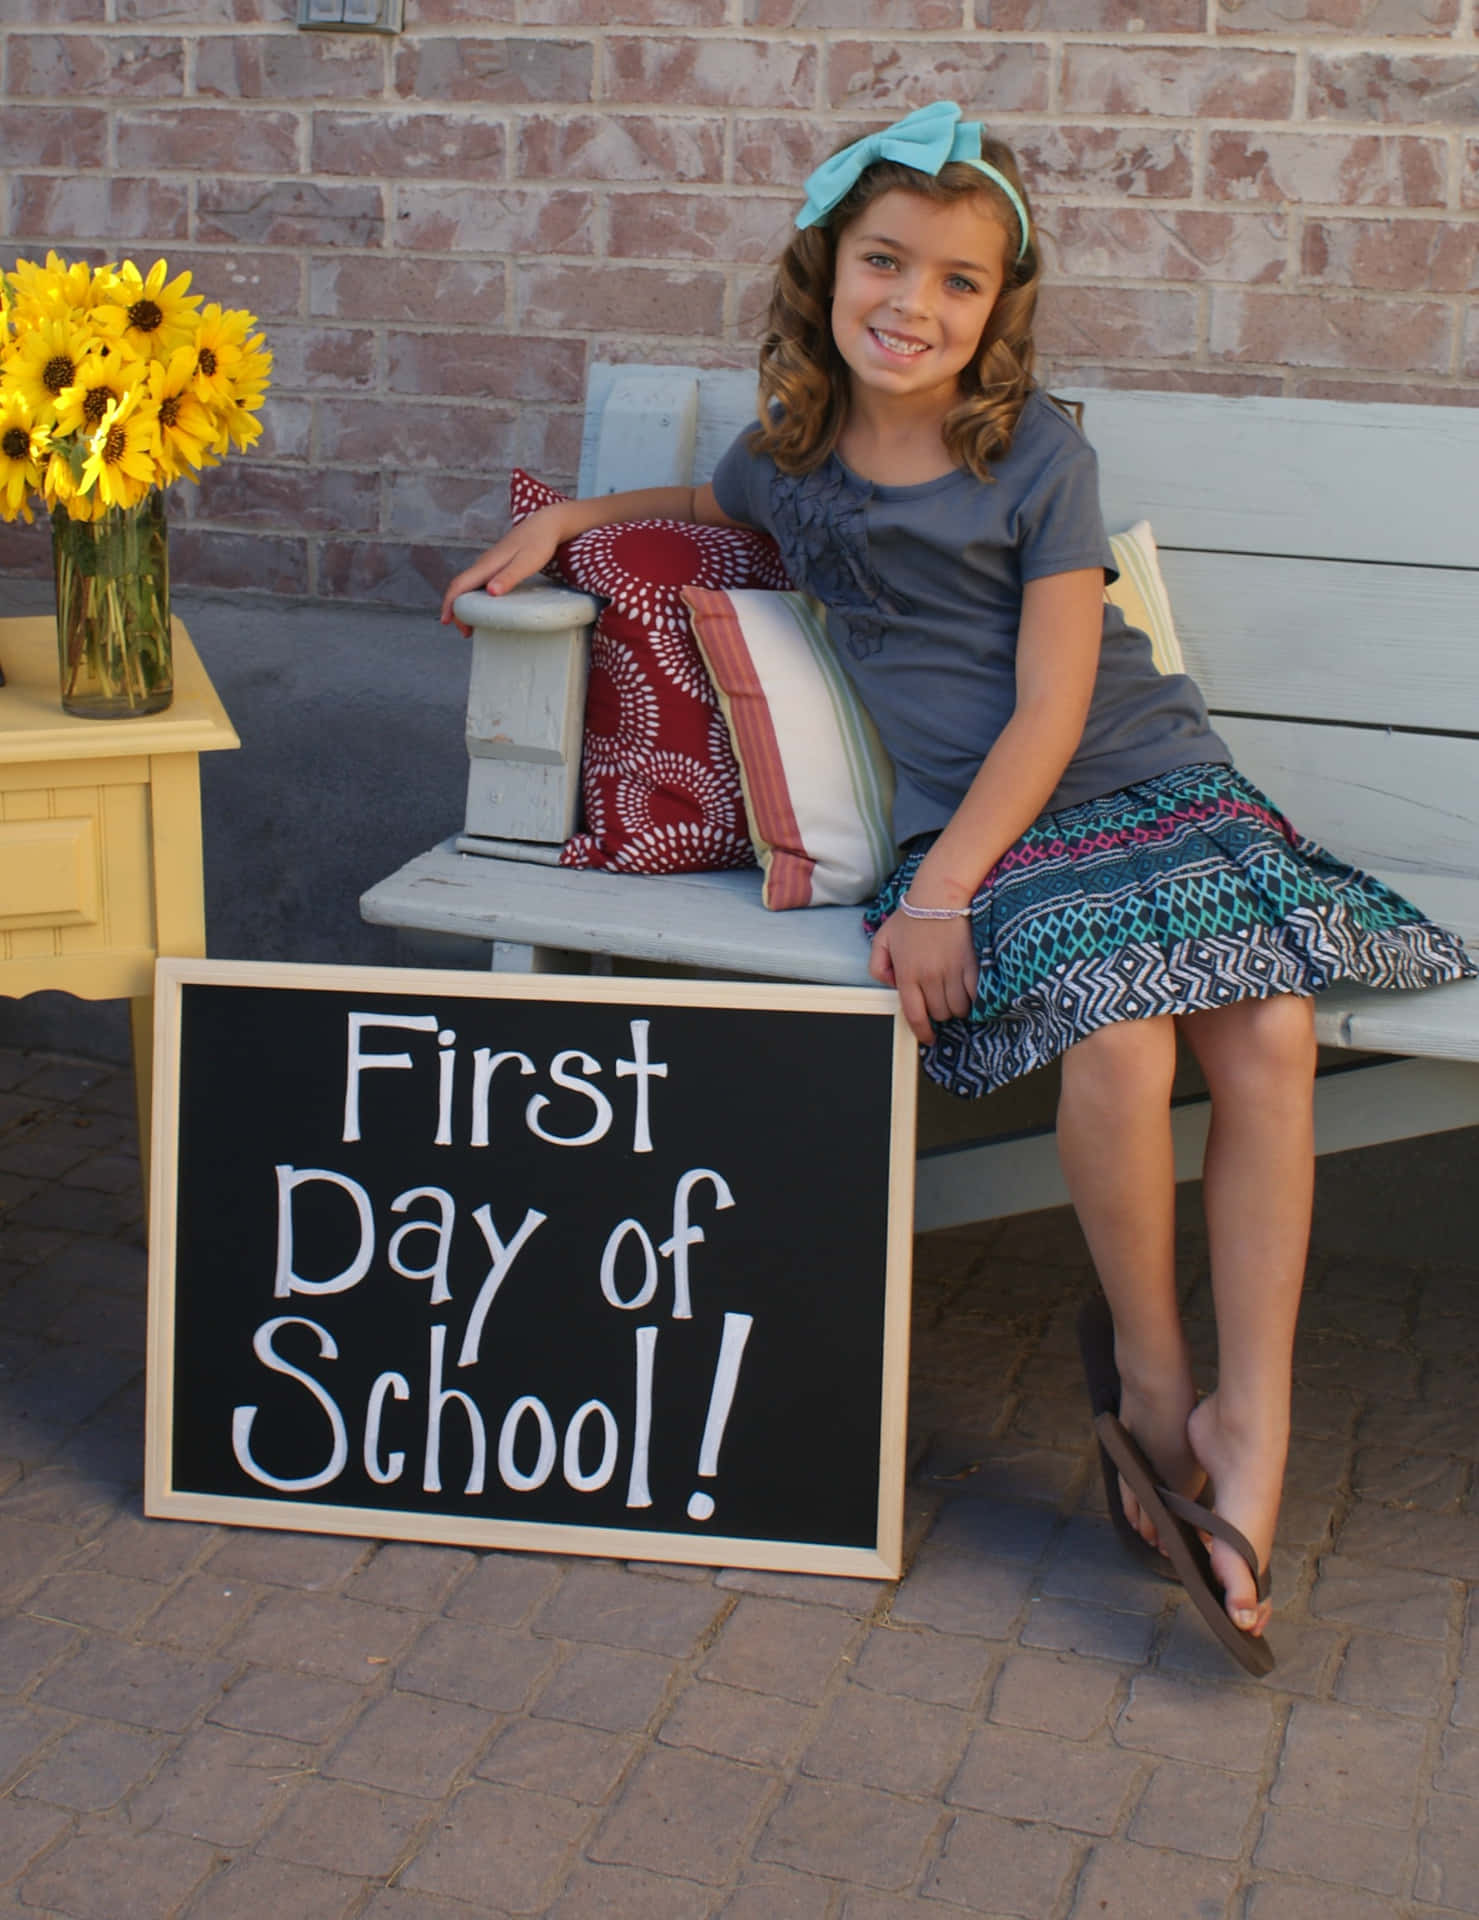 Download First Day Of School Pictures 1787 X 2320